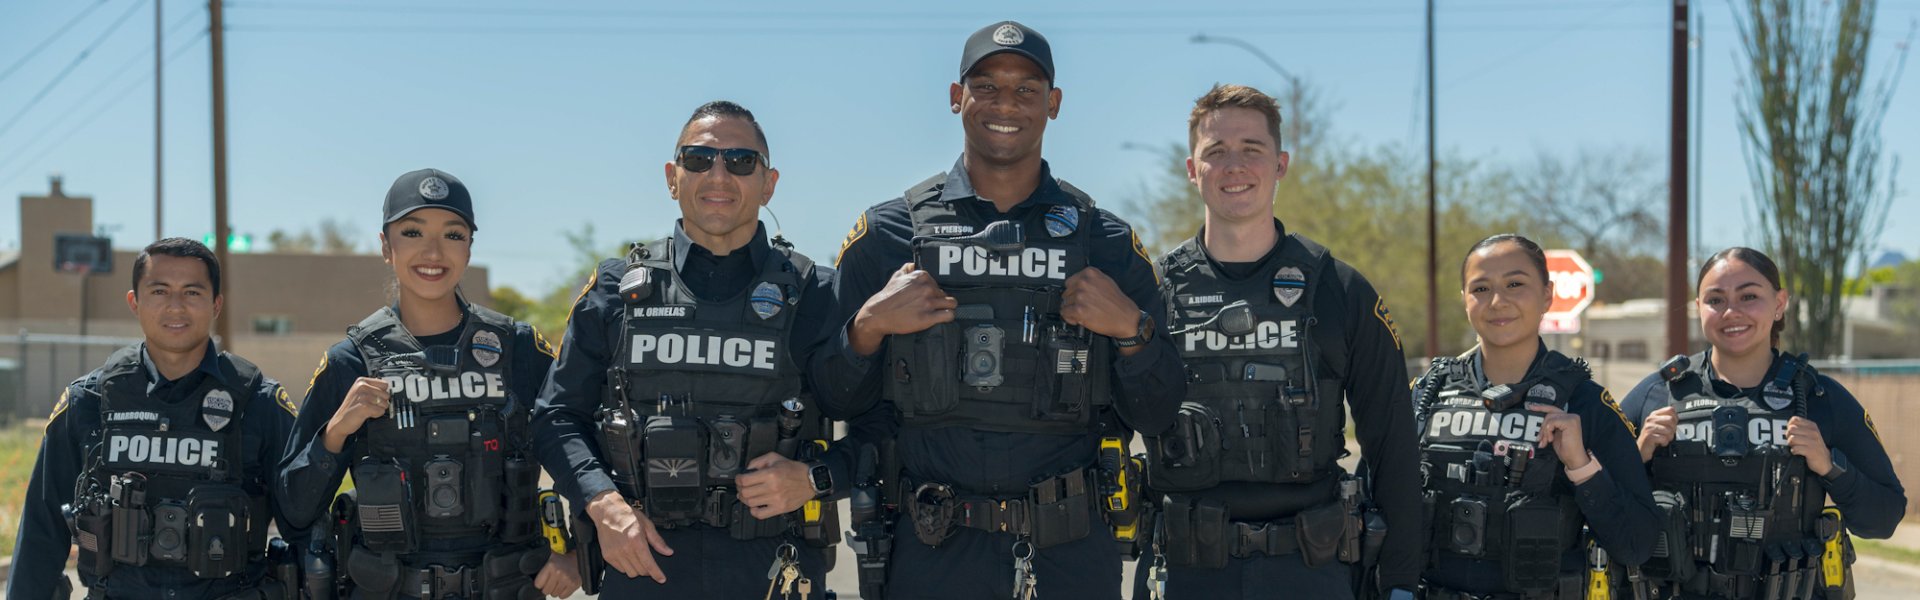 Officers standing smiling